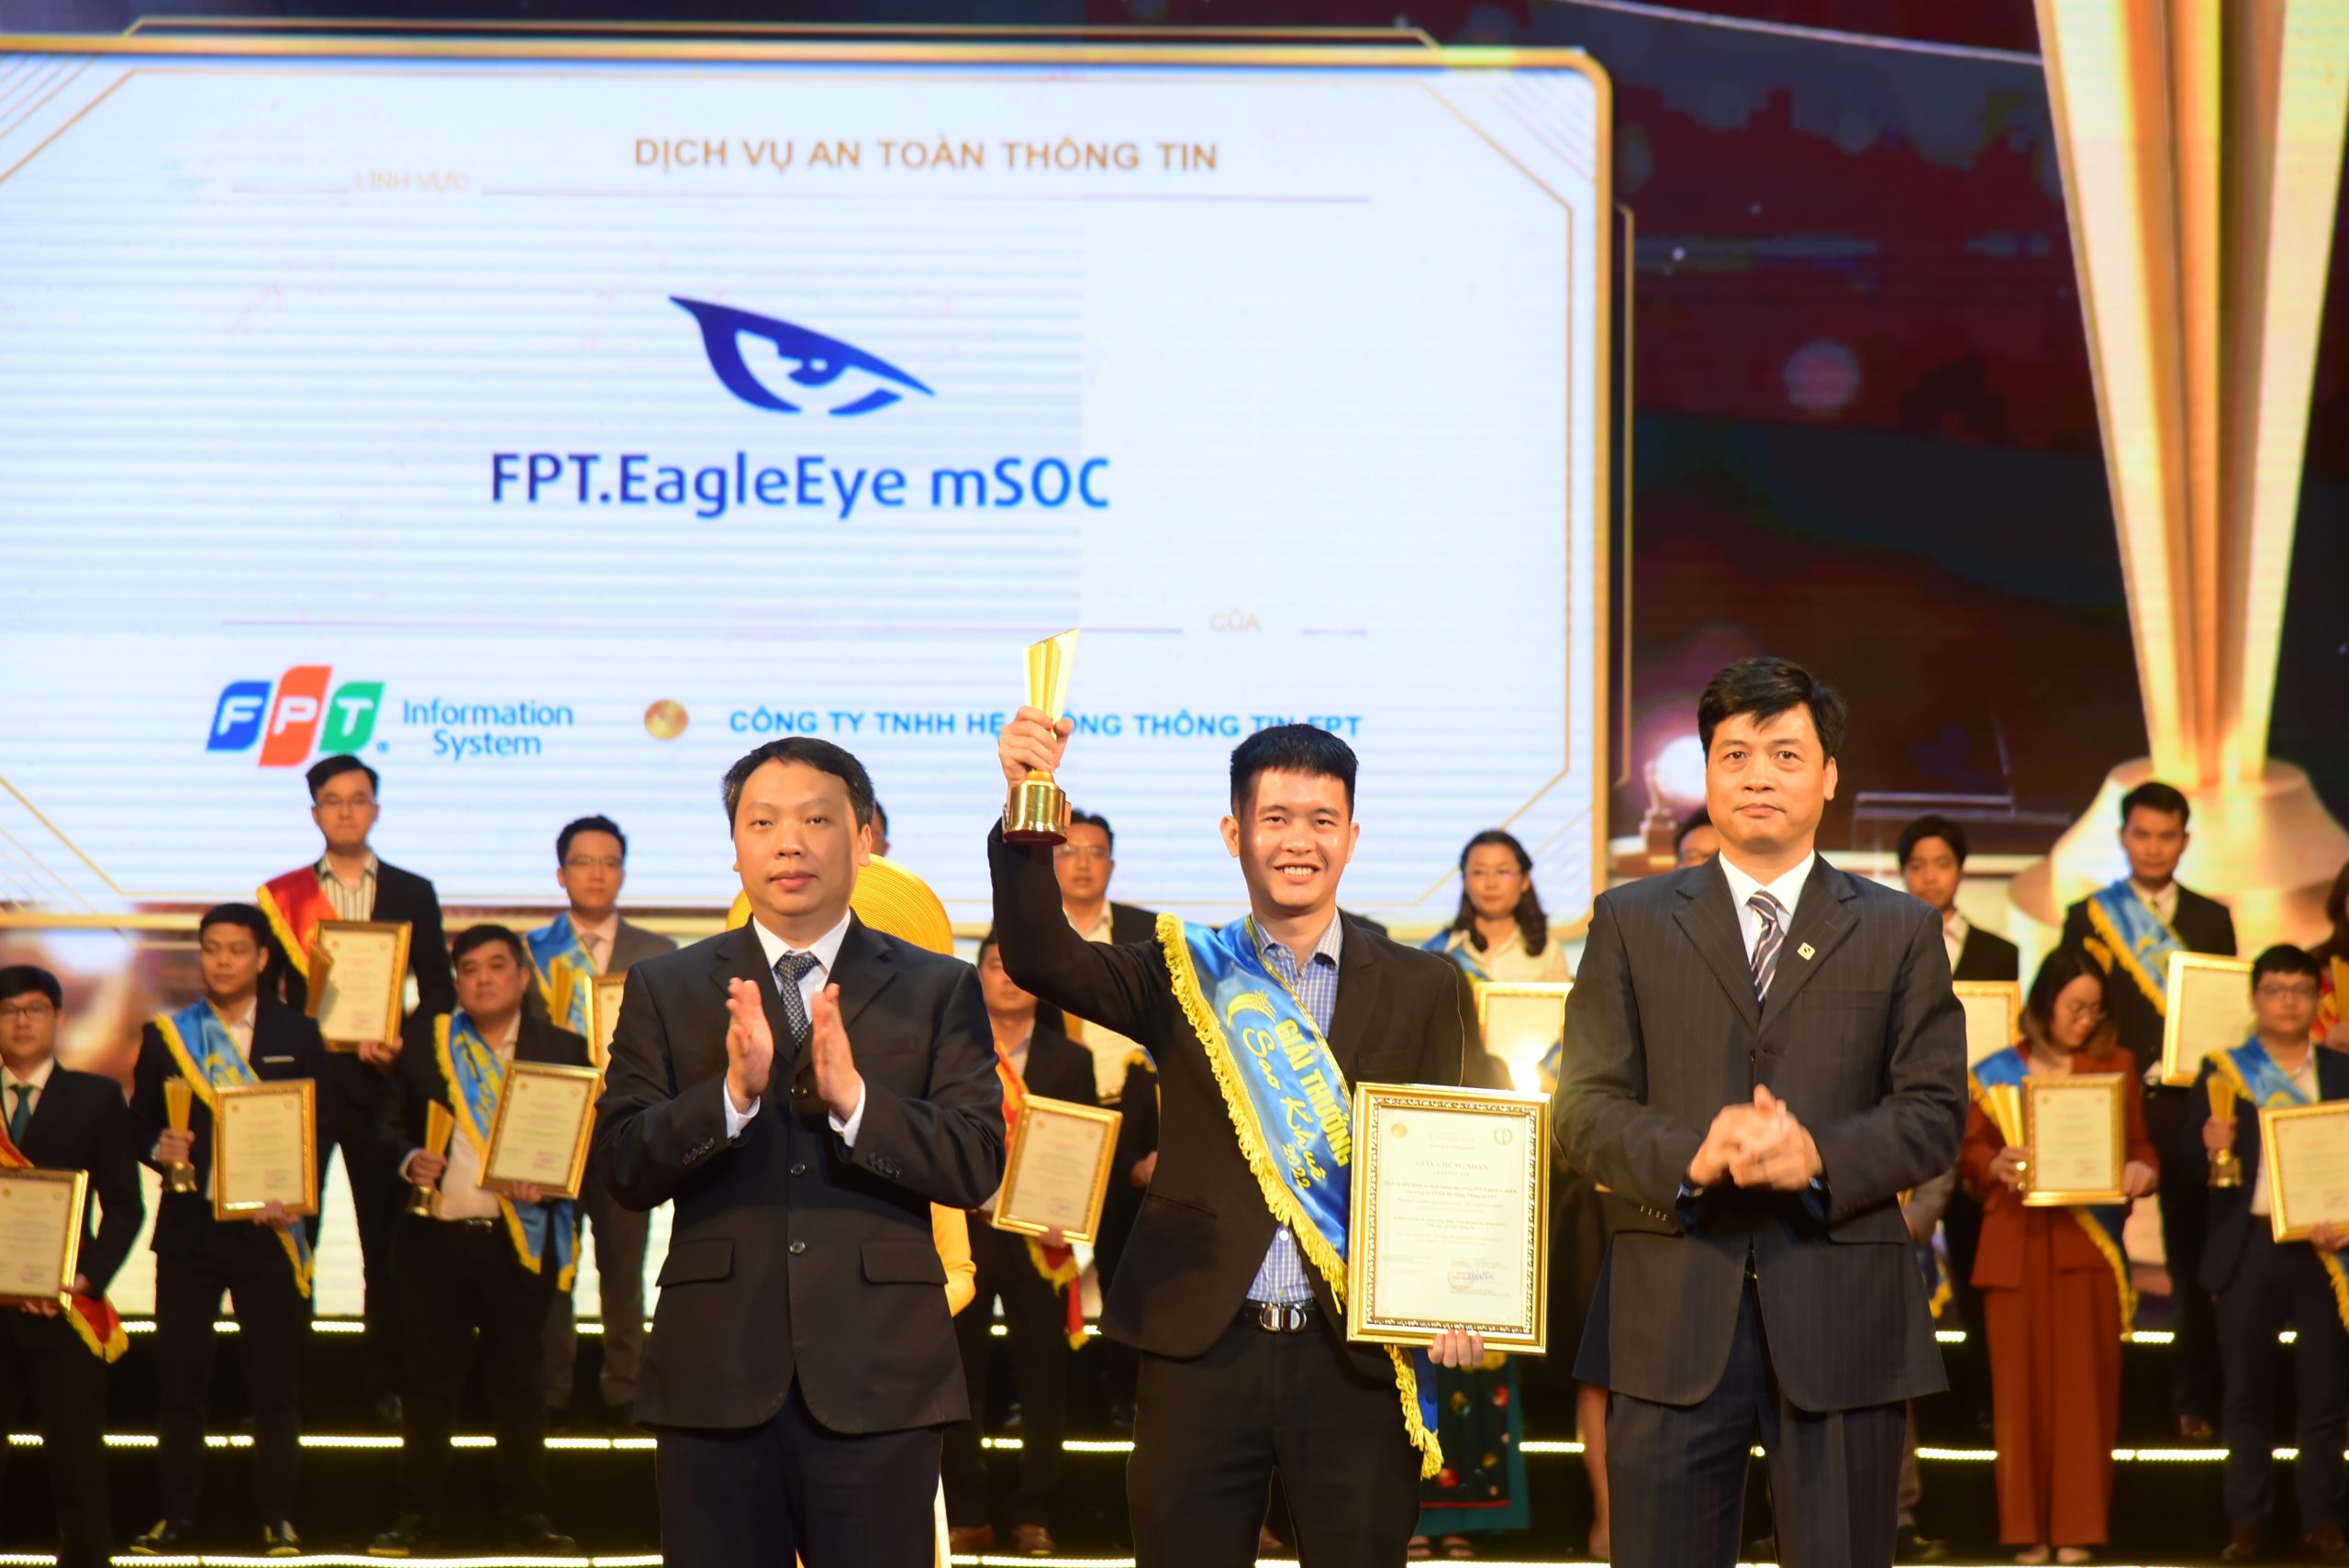 2022 Sao Khue Awards (Vietnam ICT Excellence) – Managed Security Operations Center (FPT.EagleEye mSOC)